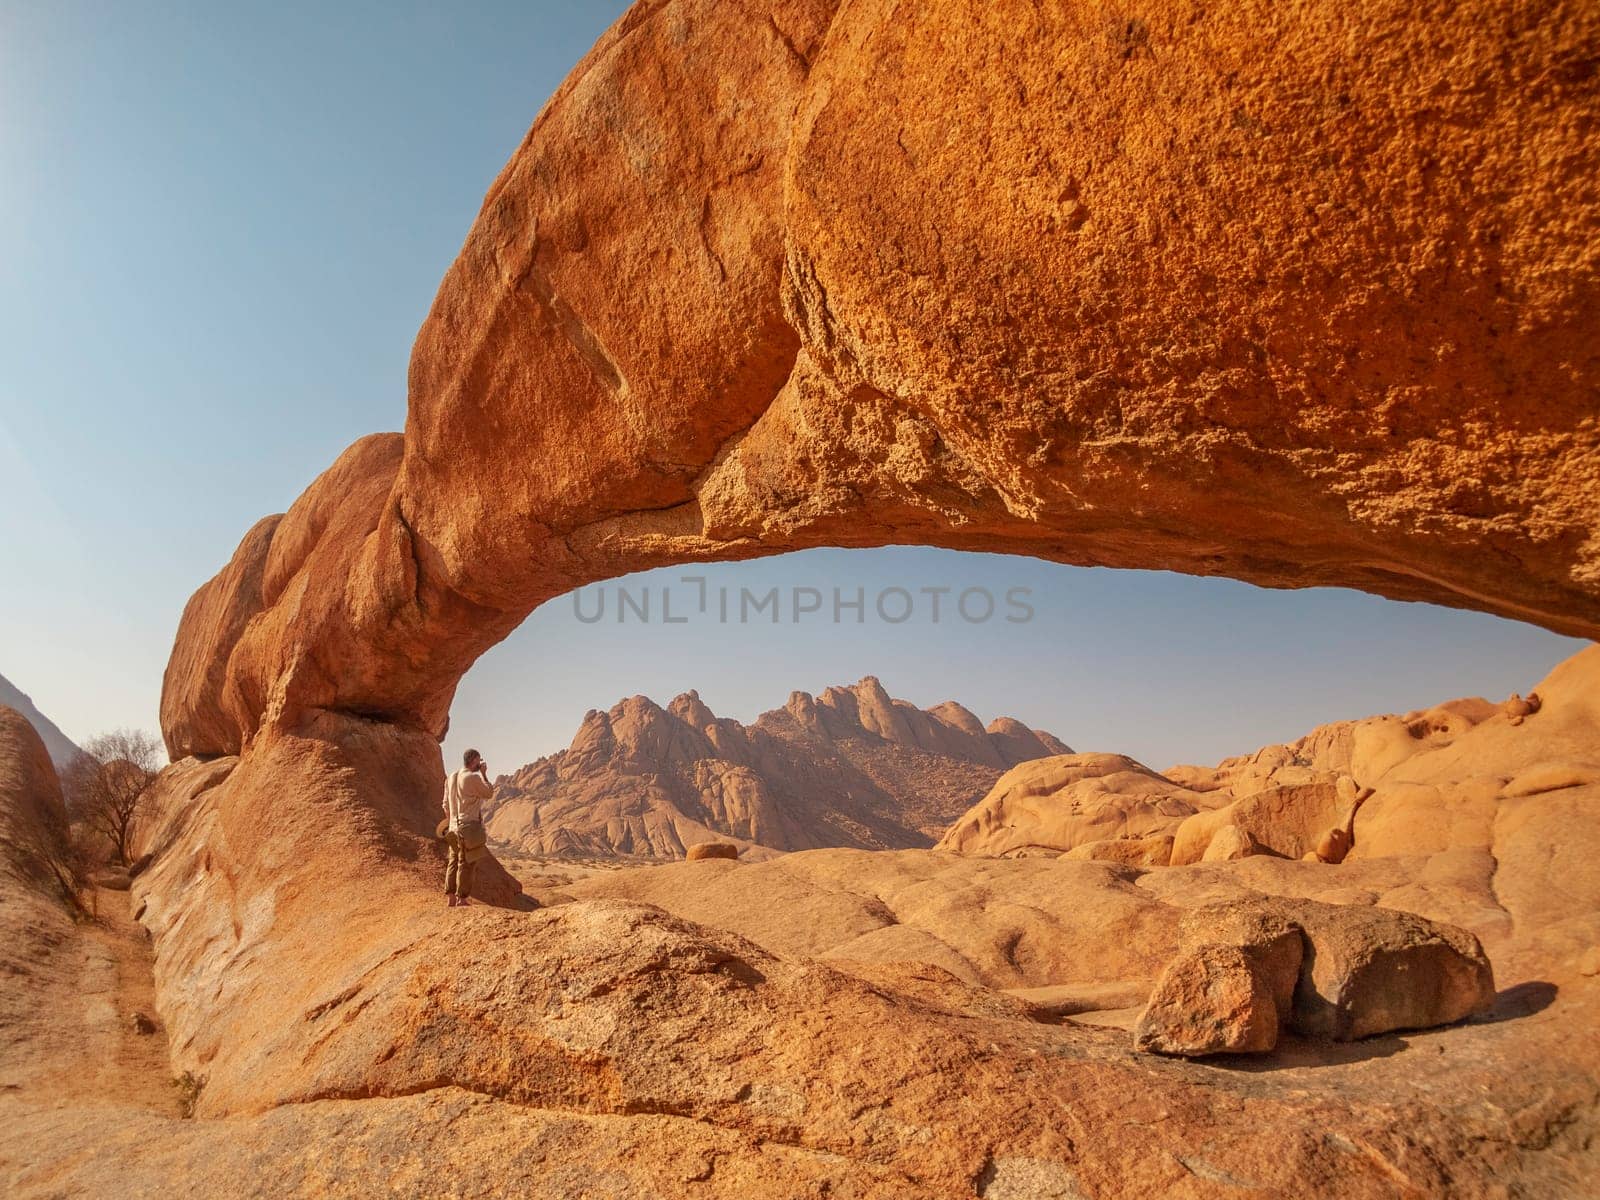 Taking pictures under the rock arch in the Spitzkoppe National Park in Namibia, Africa.